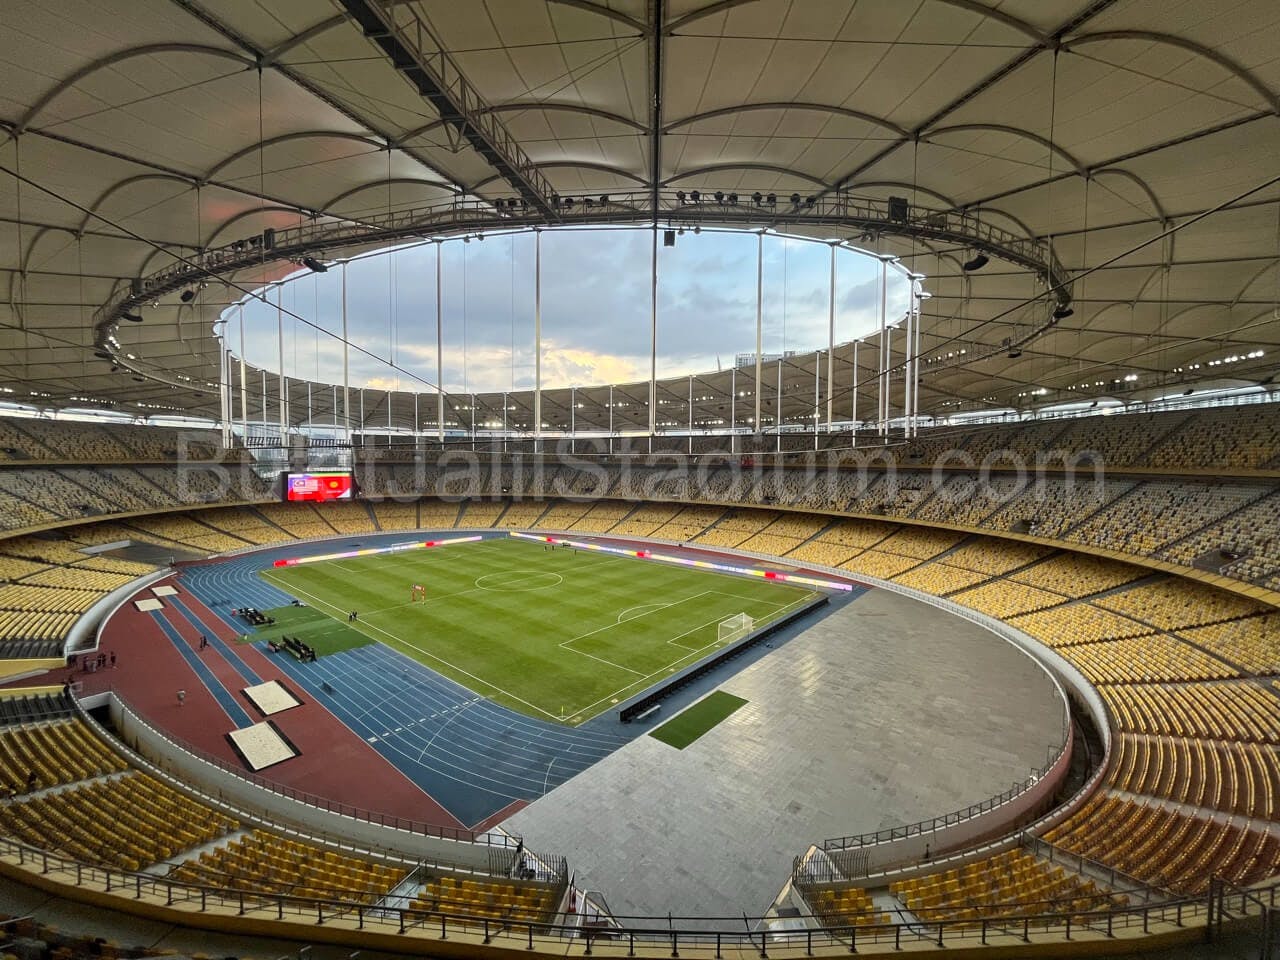 0.5x View of Bukit Jalil field from section 326 of Stadium Bukit Jalil.